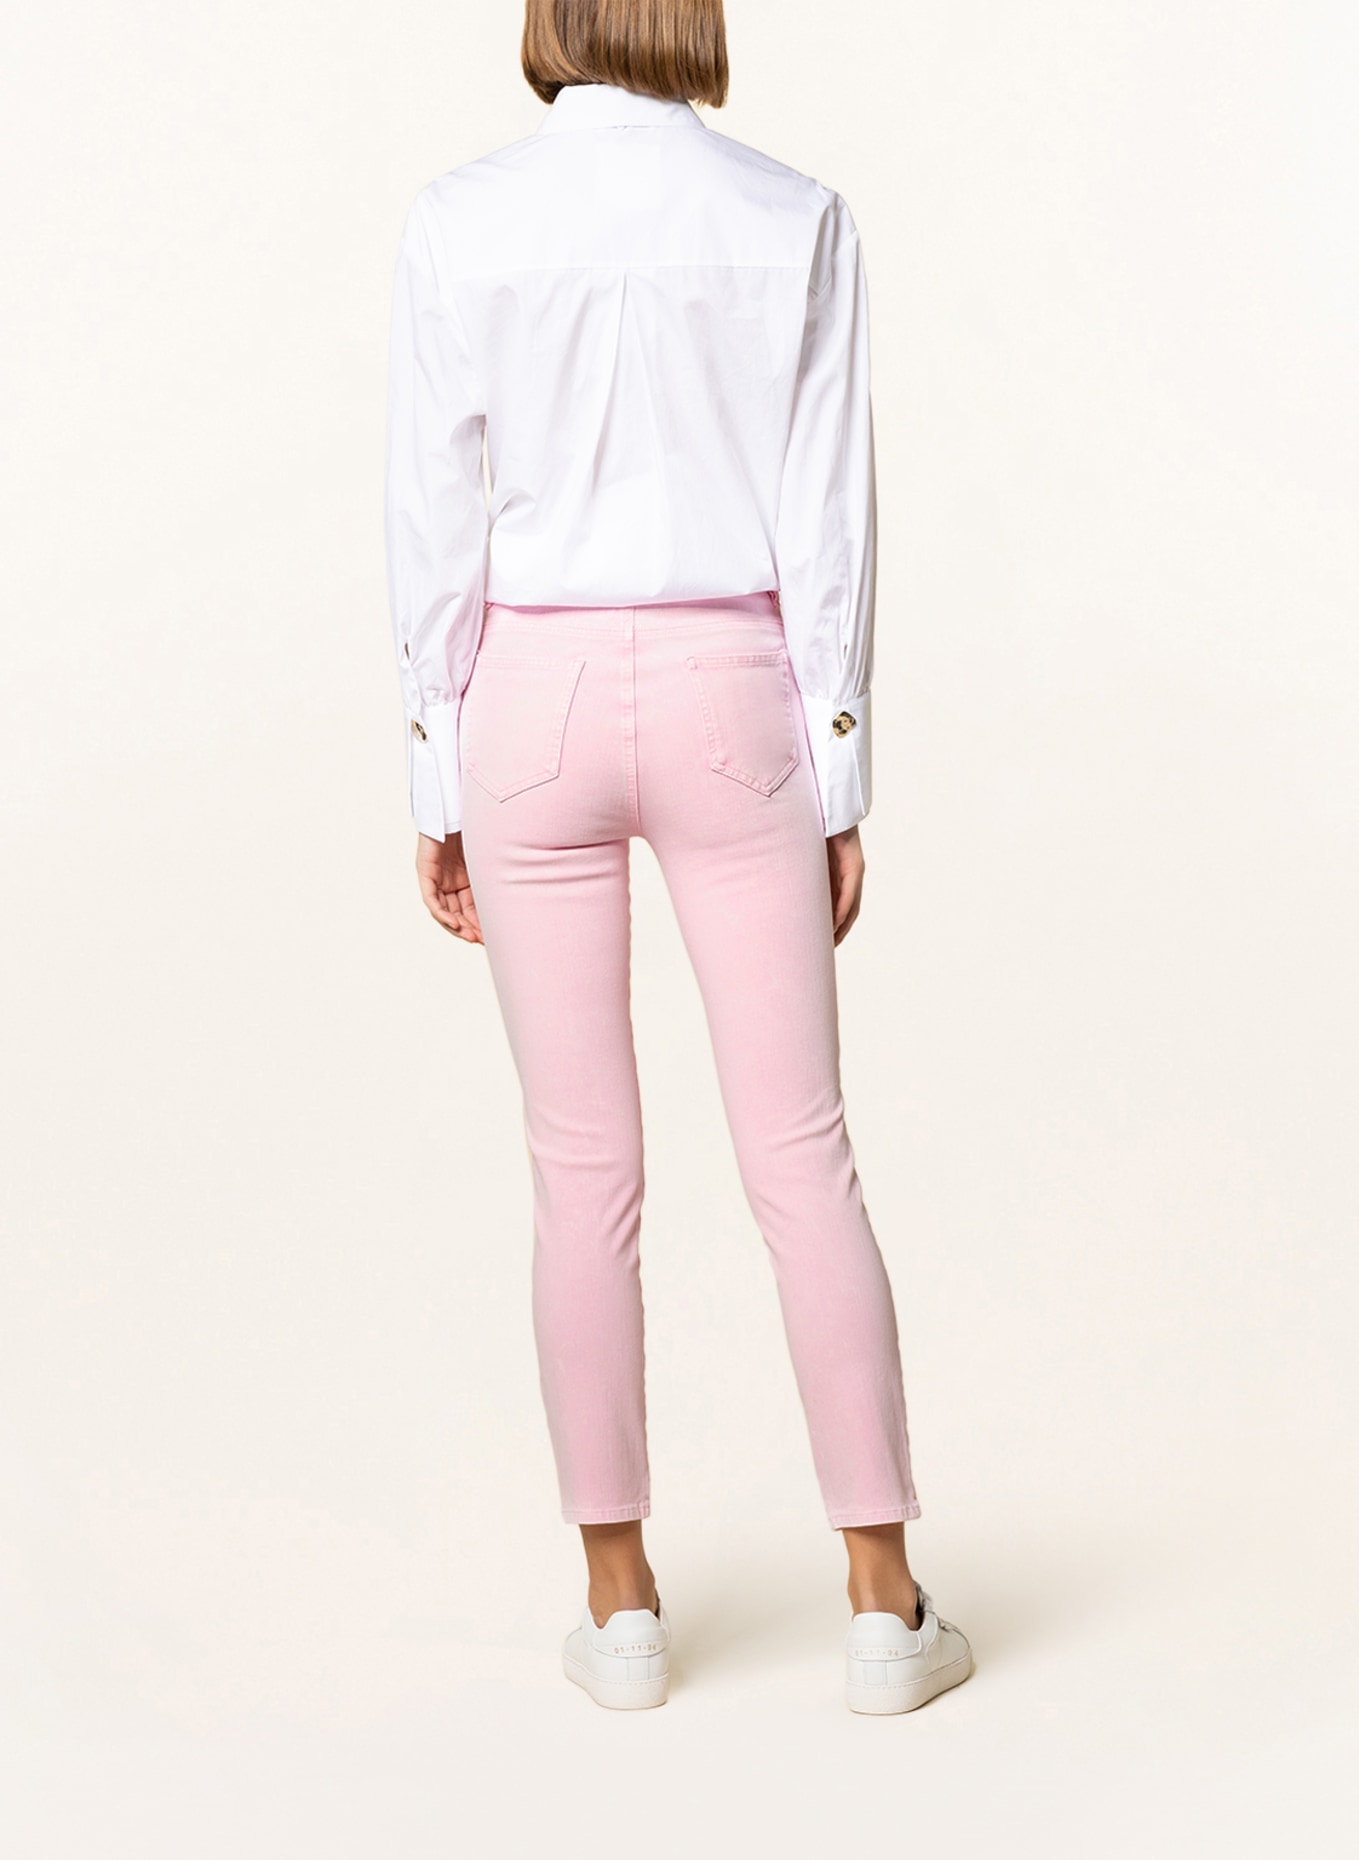 ITEM m6 Flared Jeans mit Shaping-Effekt, Farbe: 753 washed out pink (Bild 3)